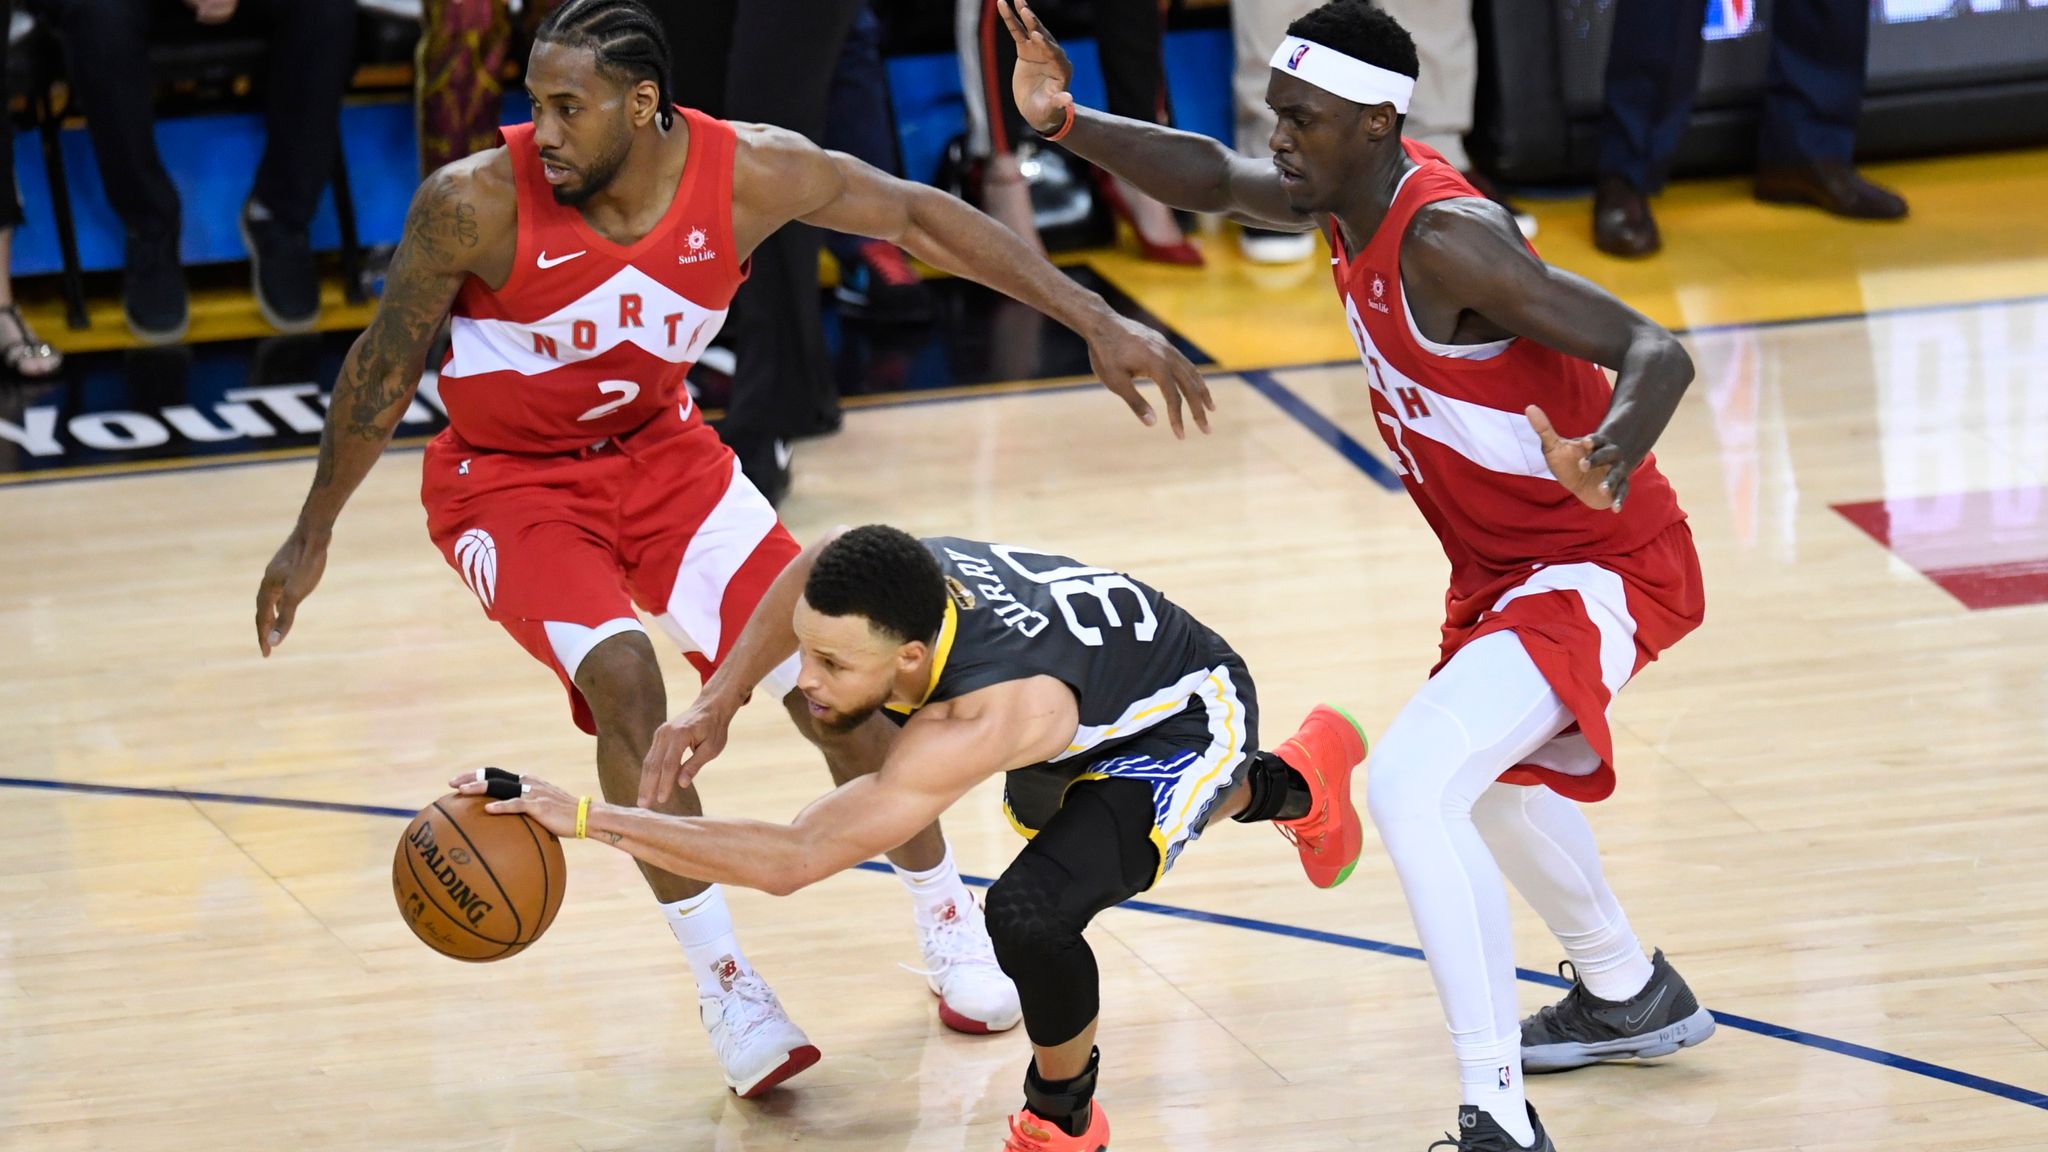 NBA Finals 2019: What did Steph Curry mean by 'janky' defense?